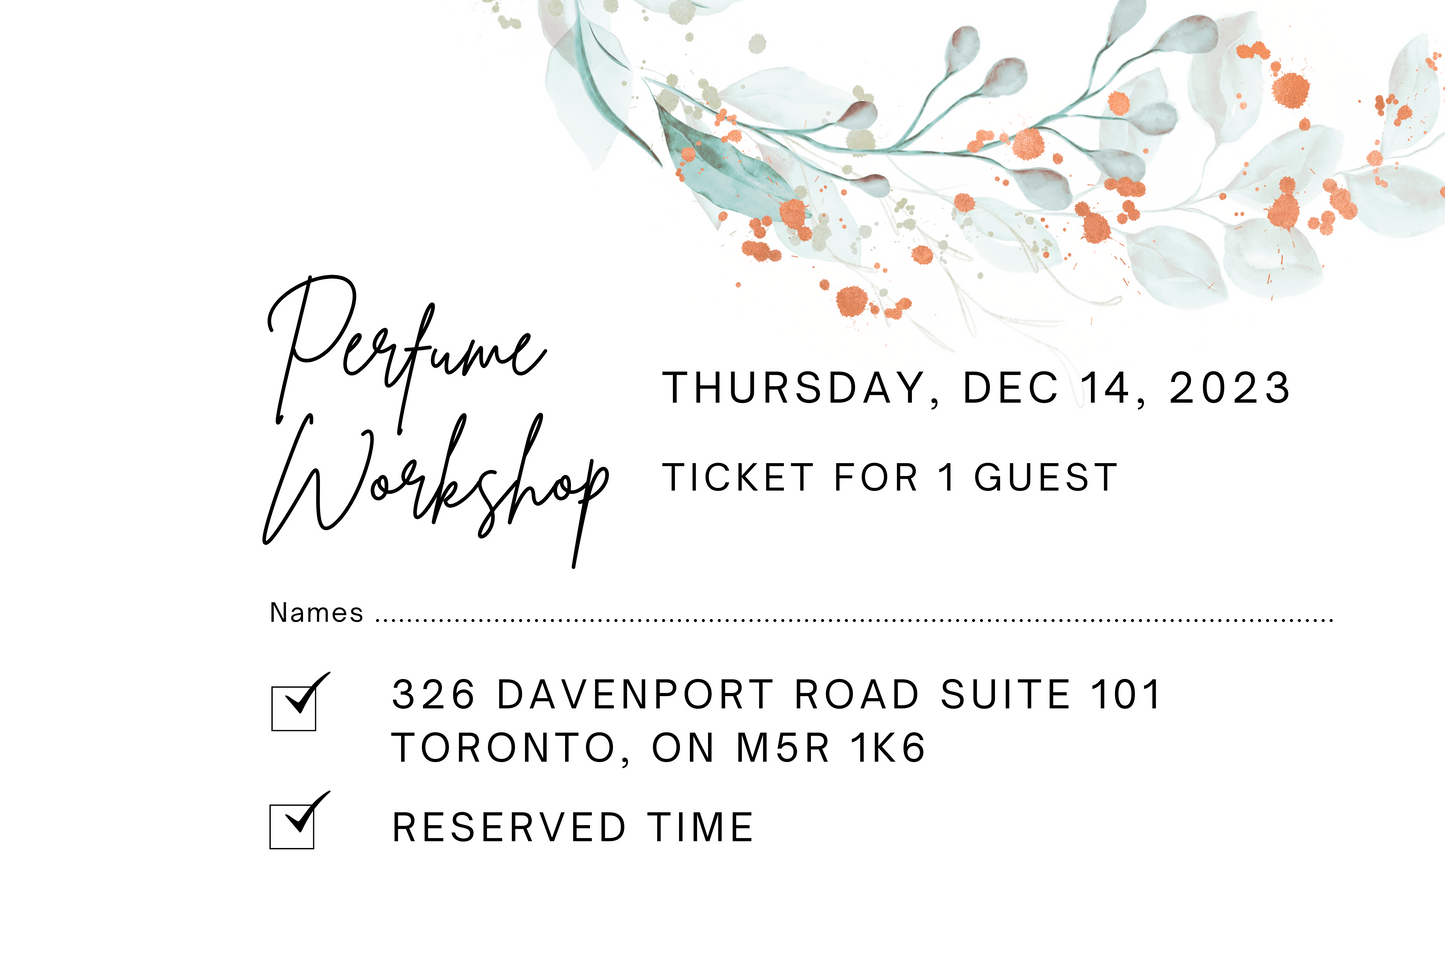 December 14th, 2023 Perfume/Cologne Workshop Session For 1 Guest